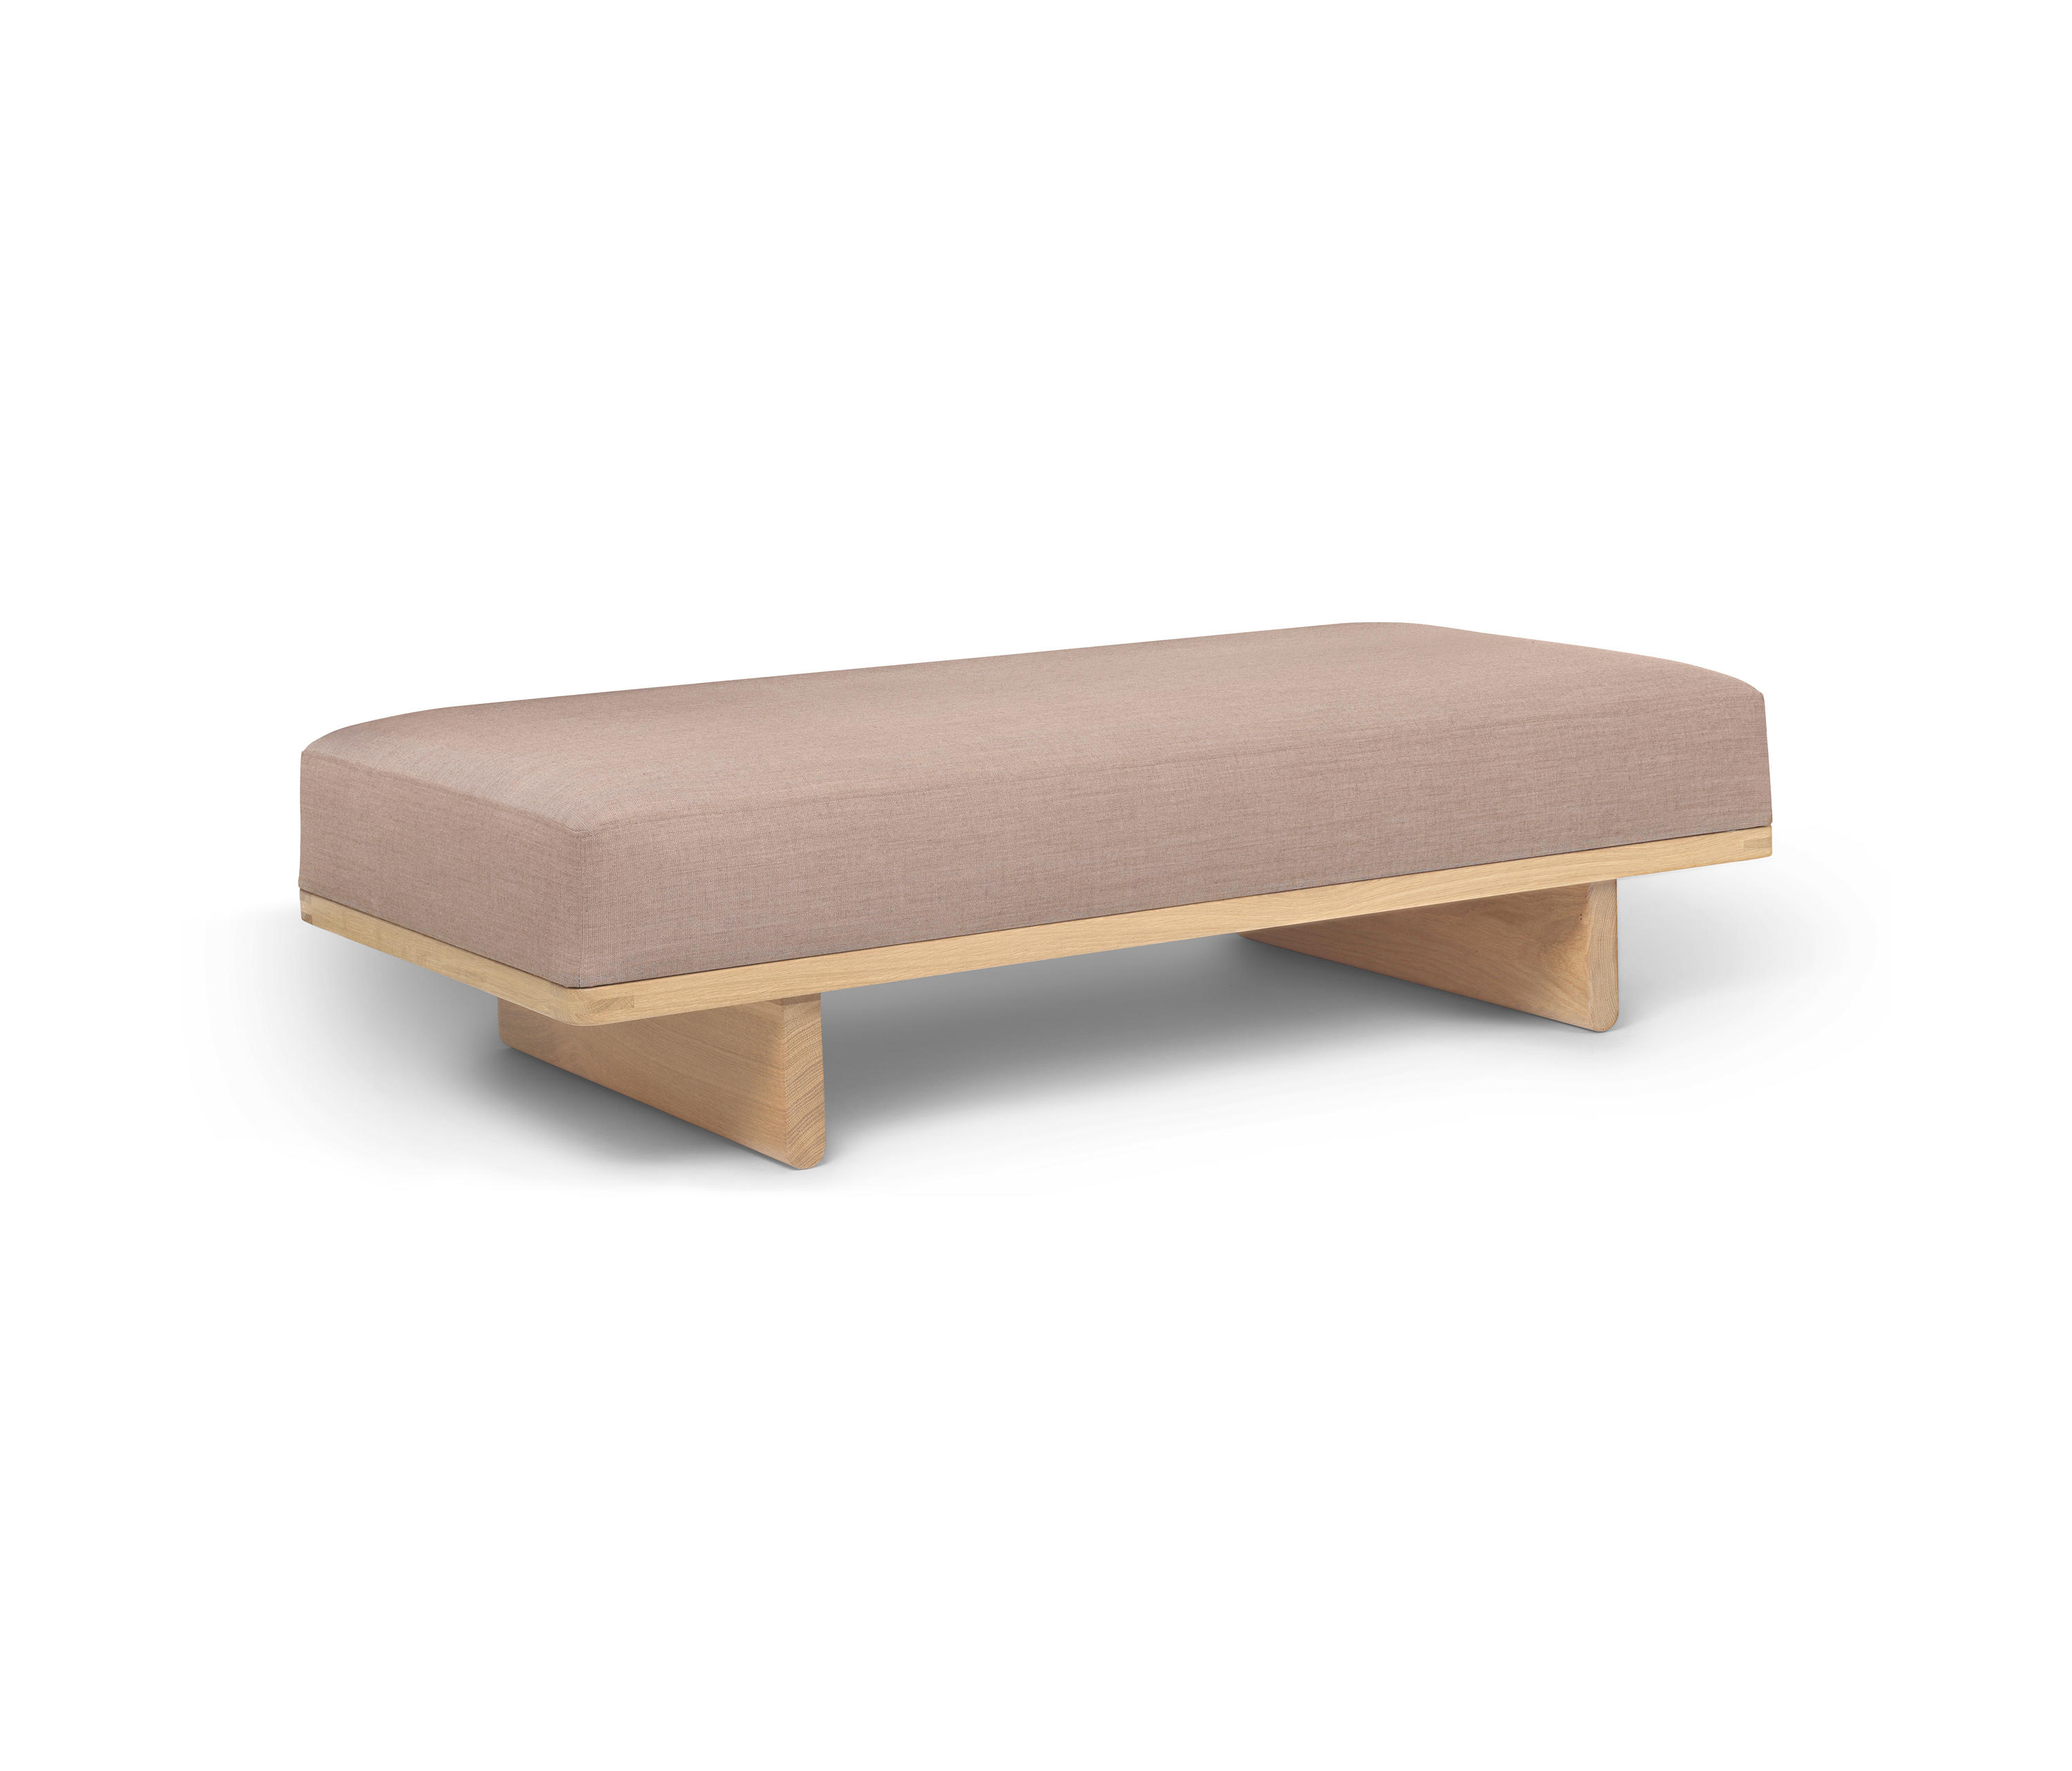 Bm0865 Daybed Benches From Carl Hansen Sn Architonic